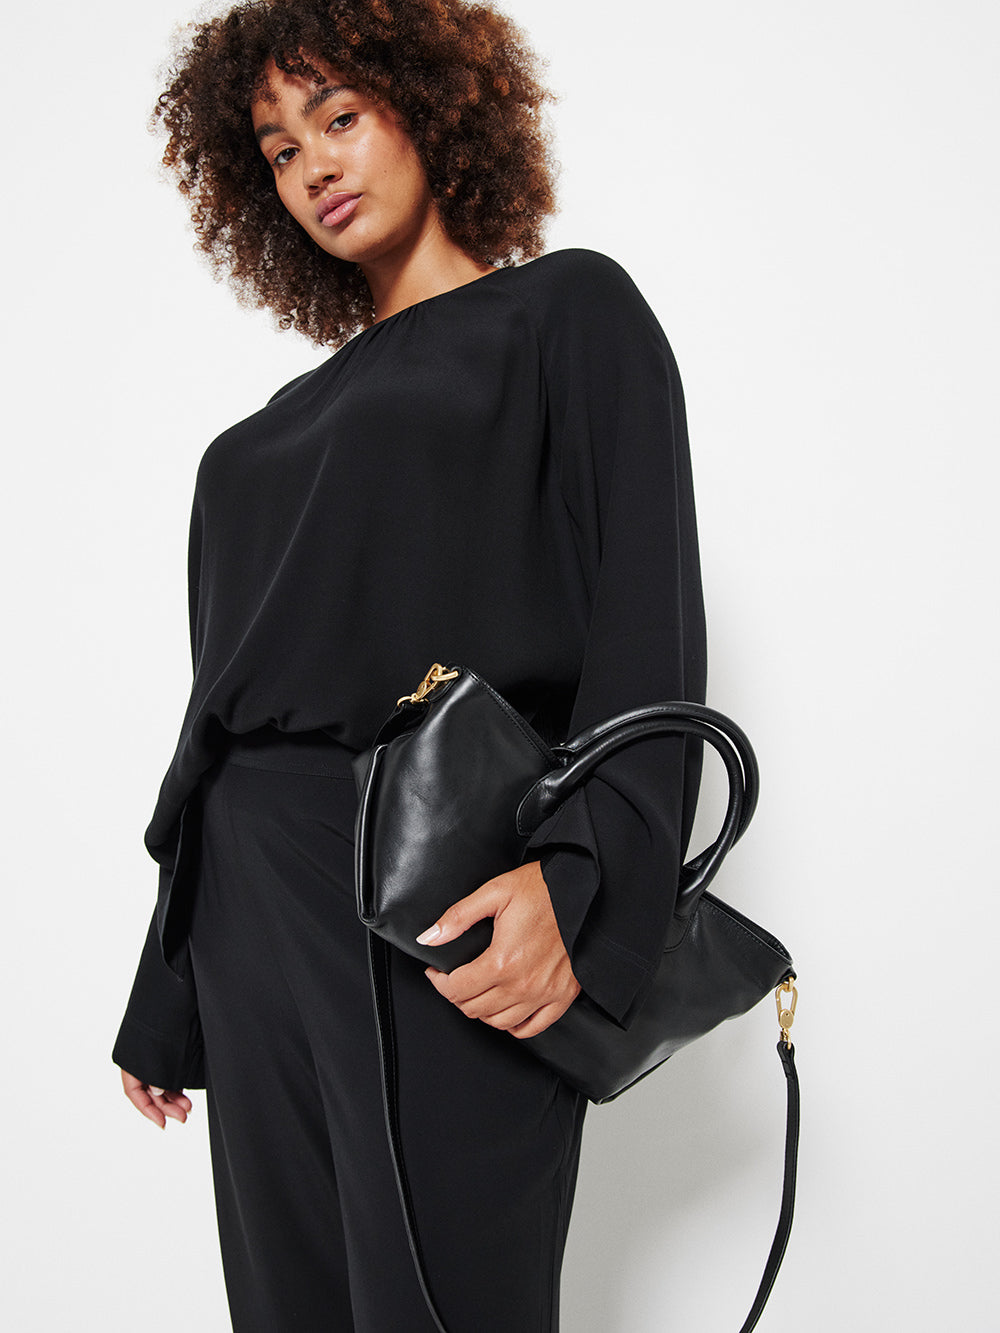 The Ellise Leather Tote